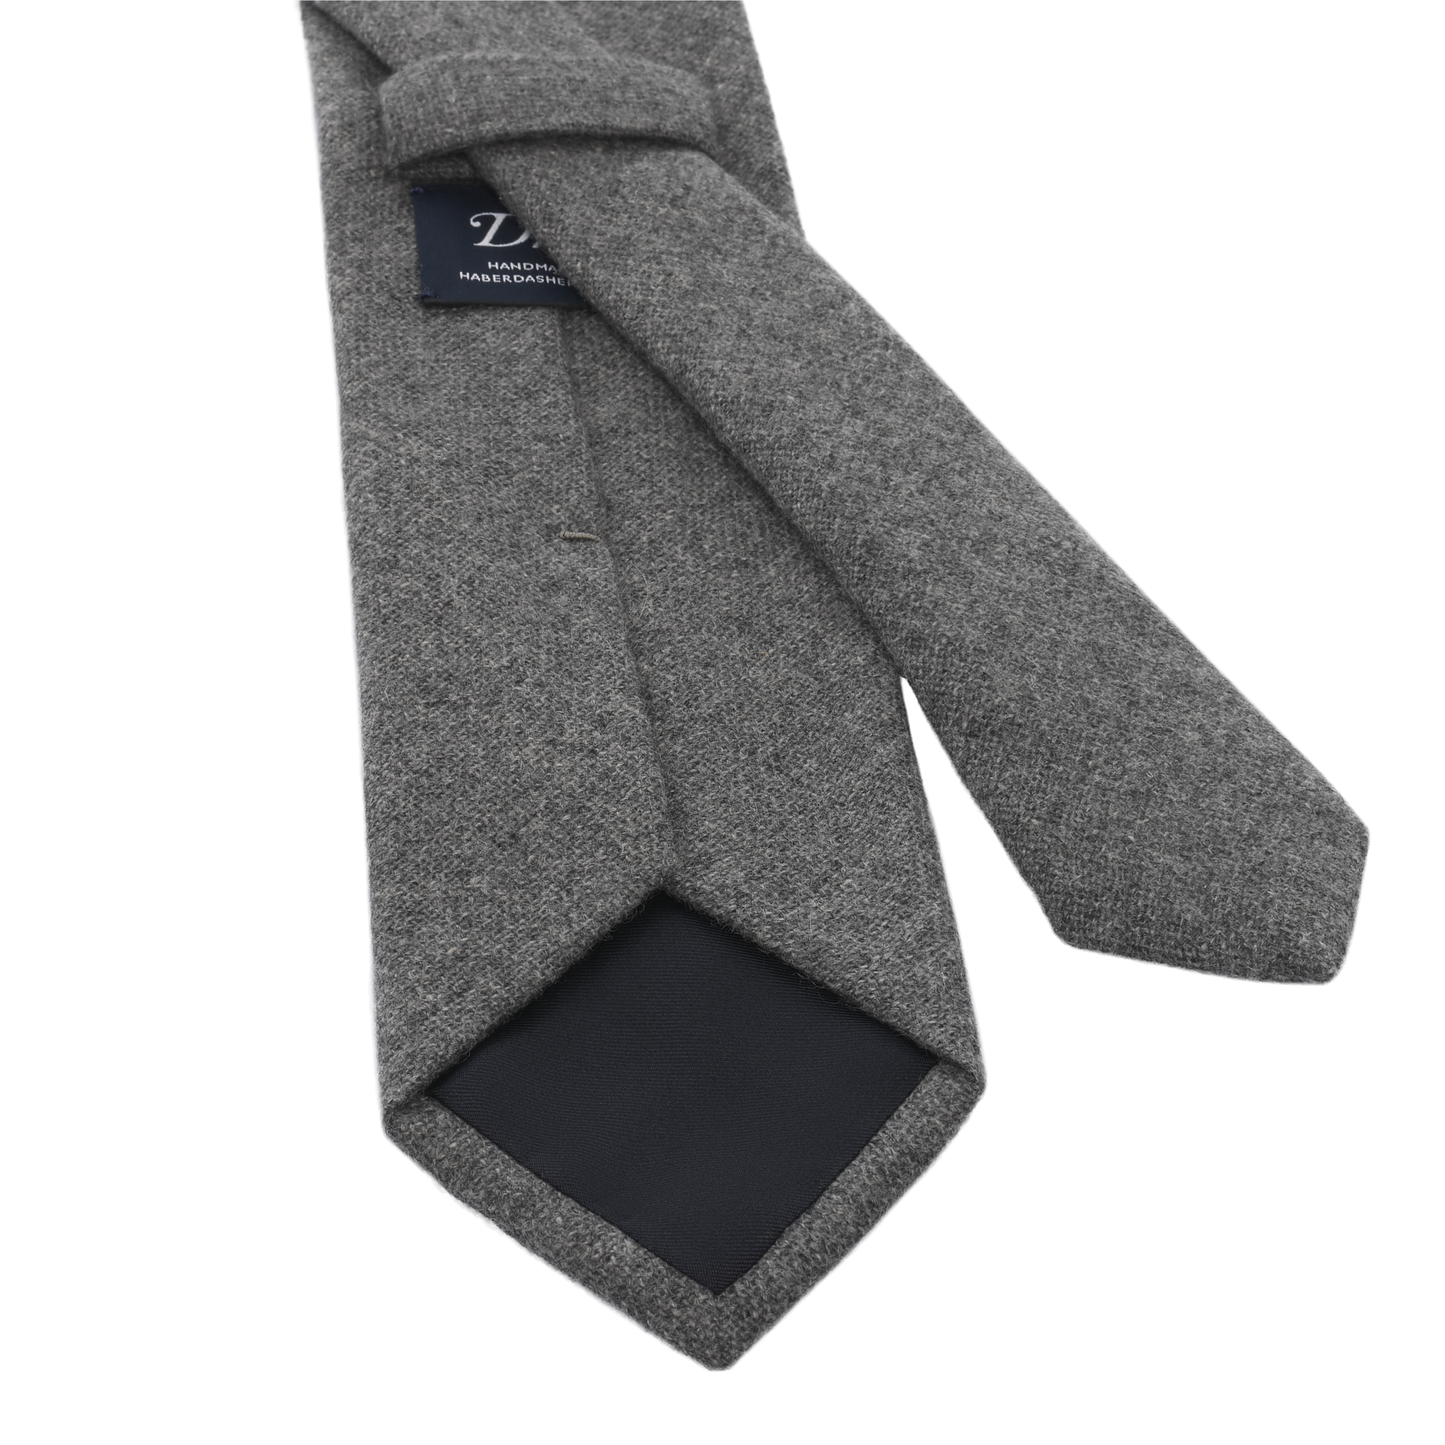 Woven Cashmere Tipped Tie in Light Grey